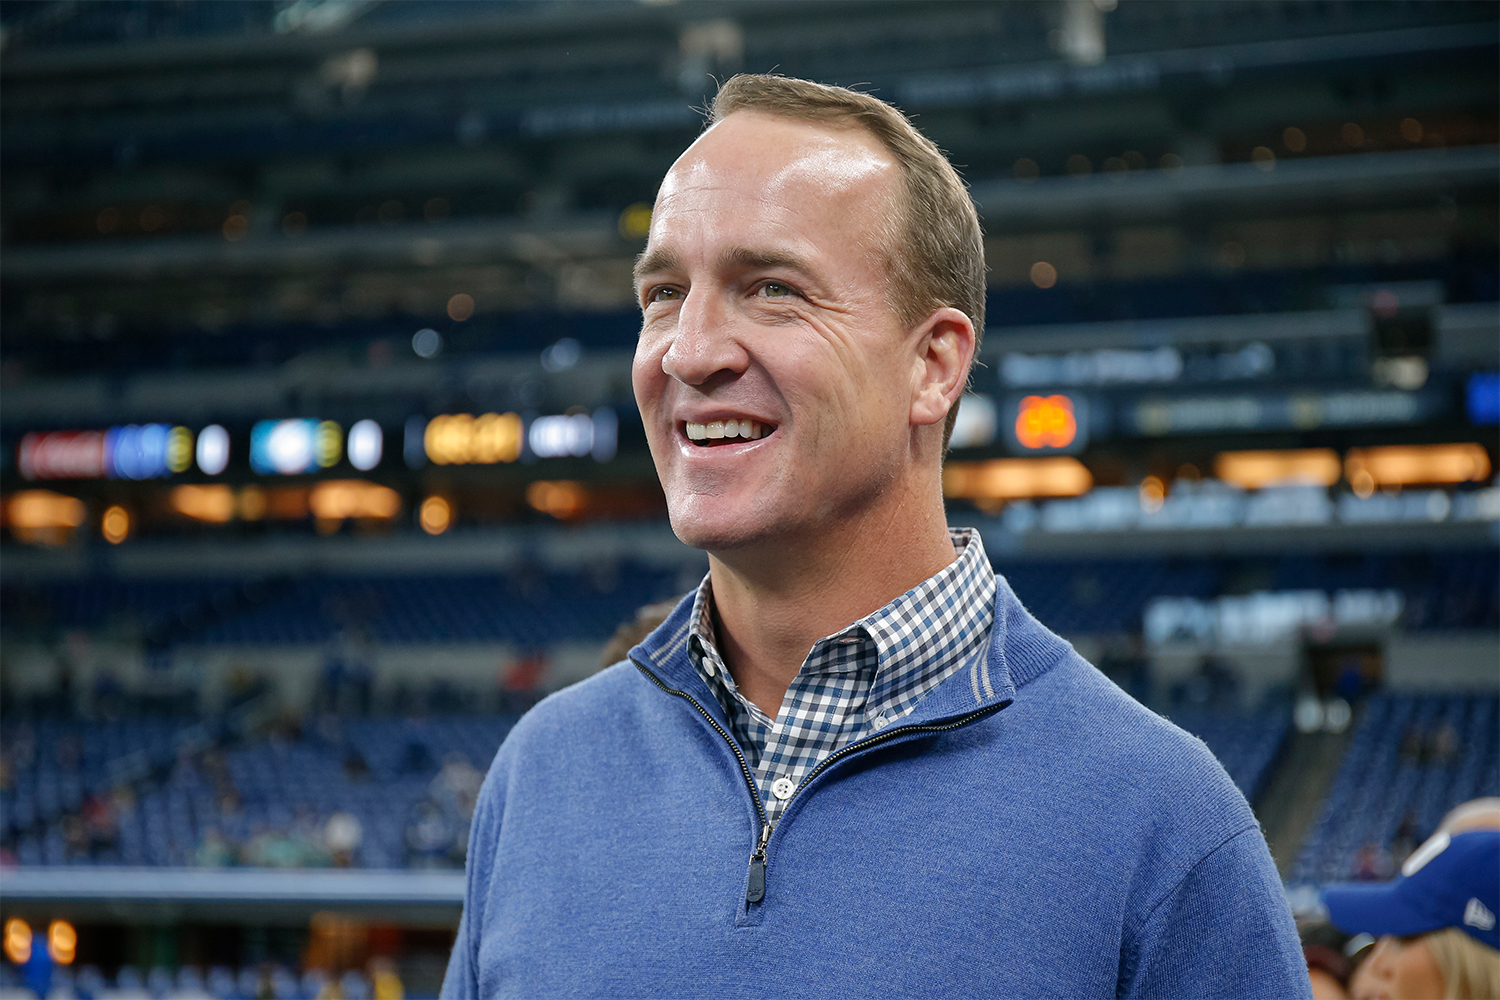 Peyton Manning before an Indianapolis Colts game in November 2019